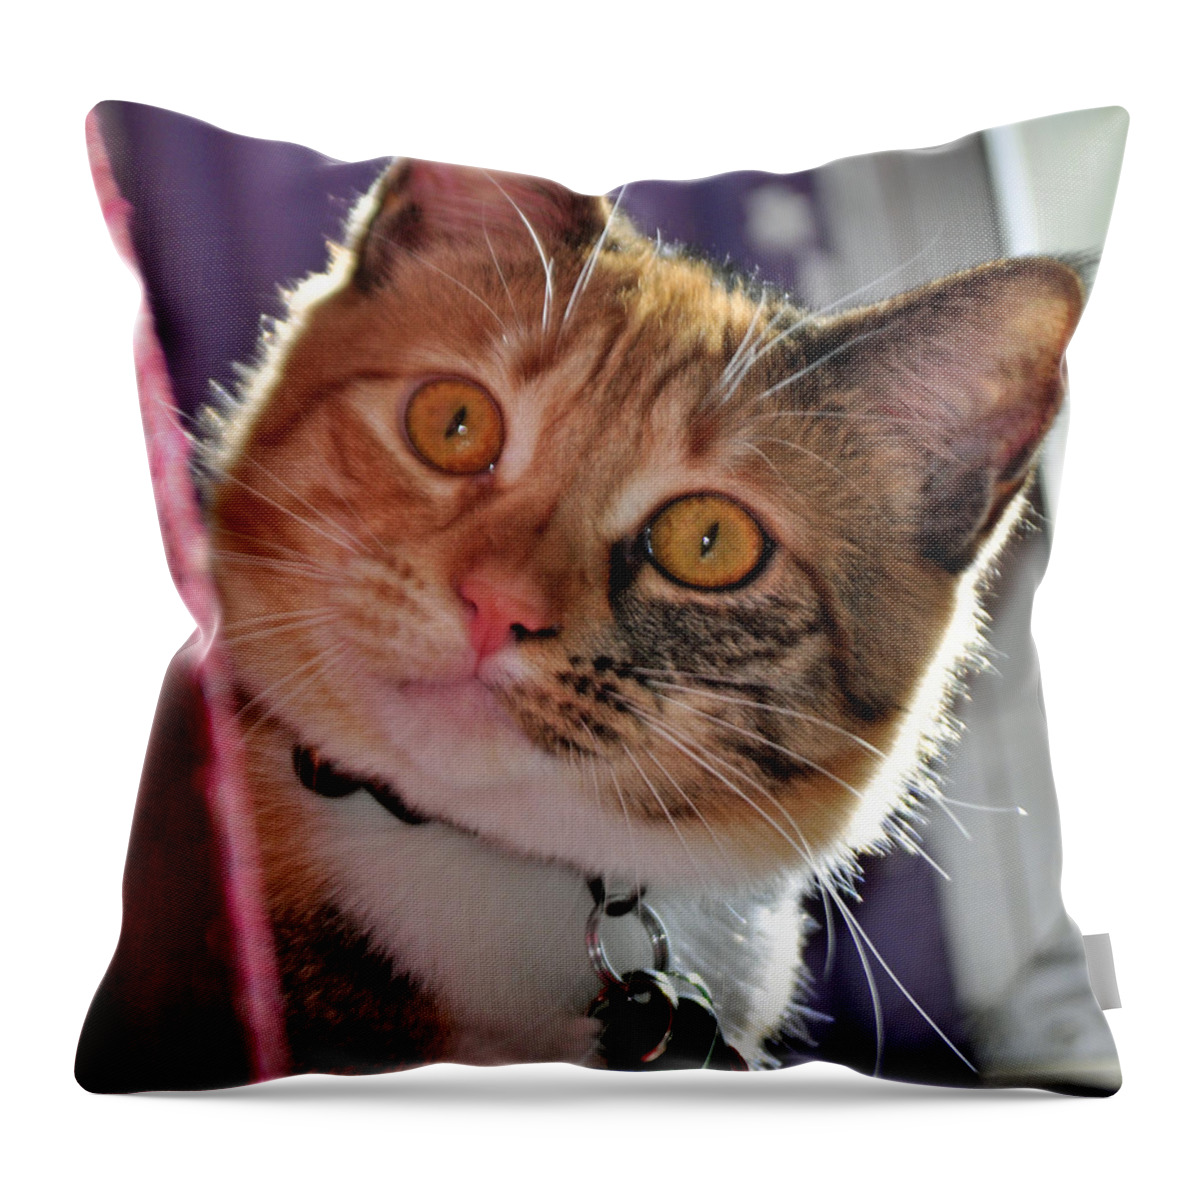 Feline Throw Pillow featuring the photograph You Talking to Me? by Tikvah's Hope